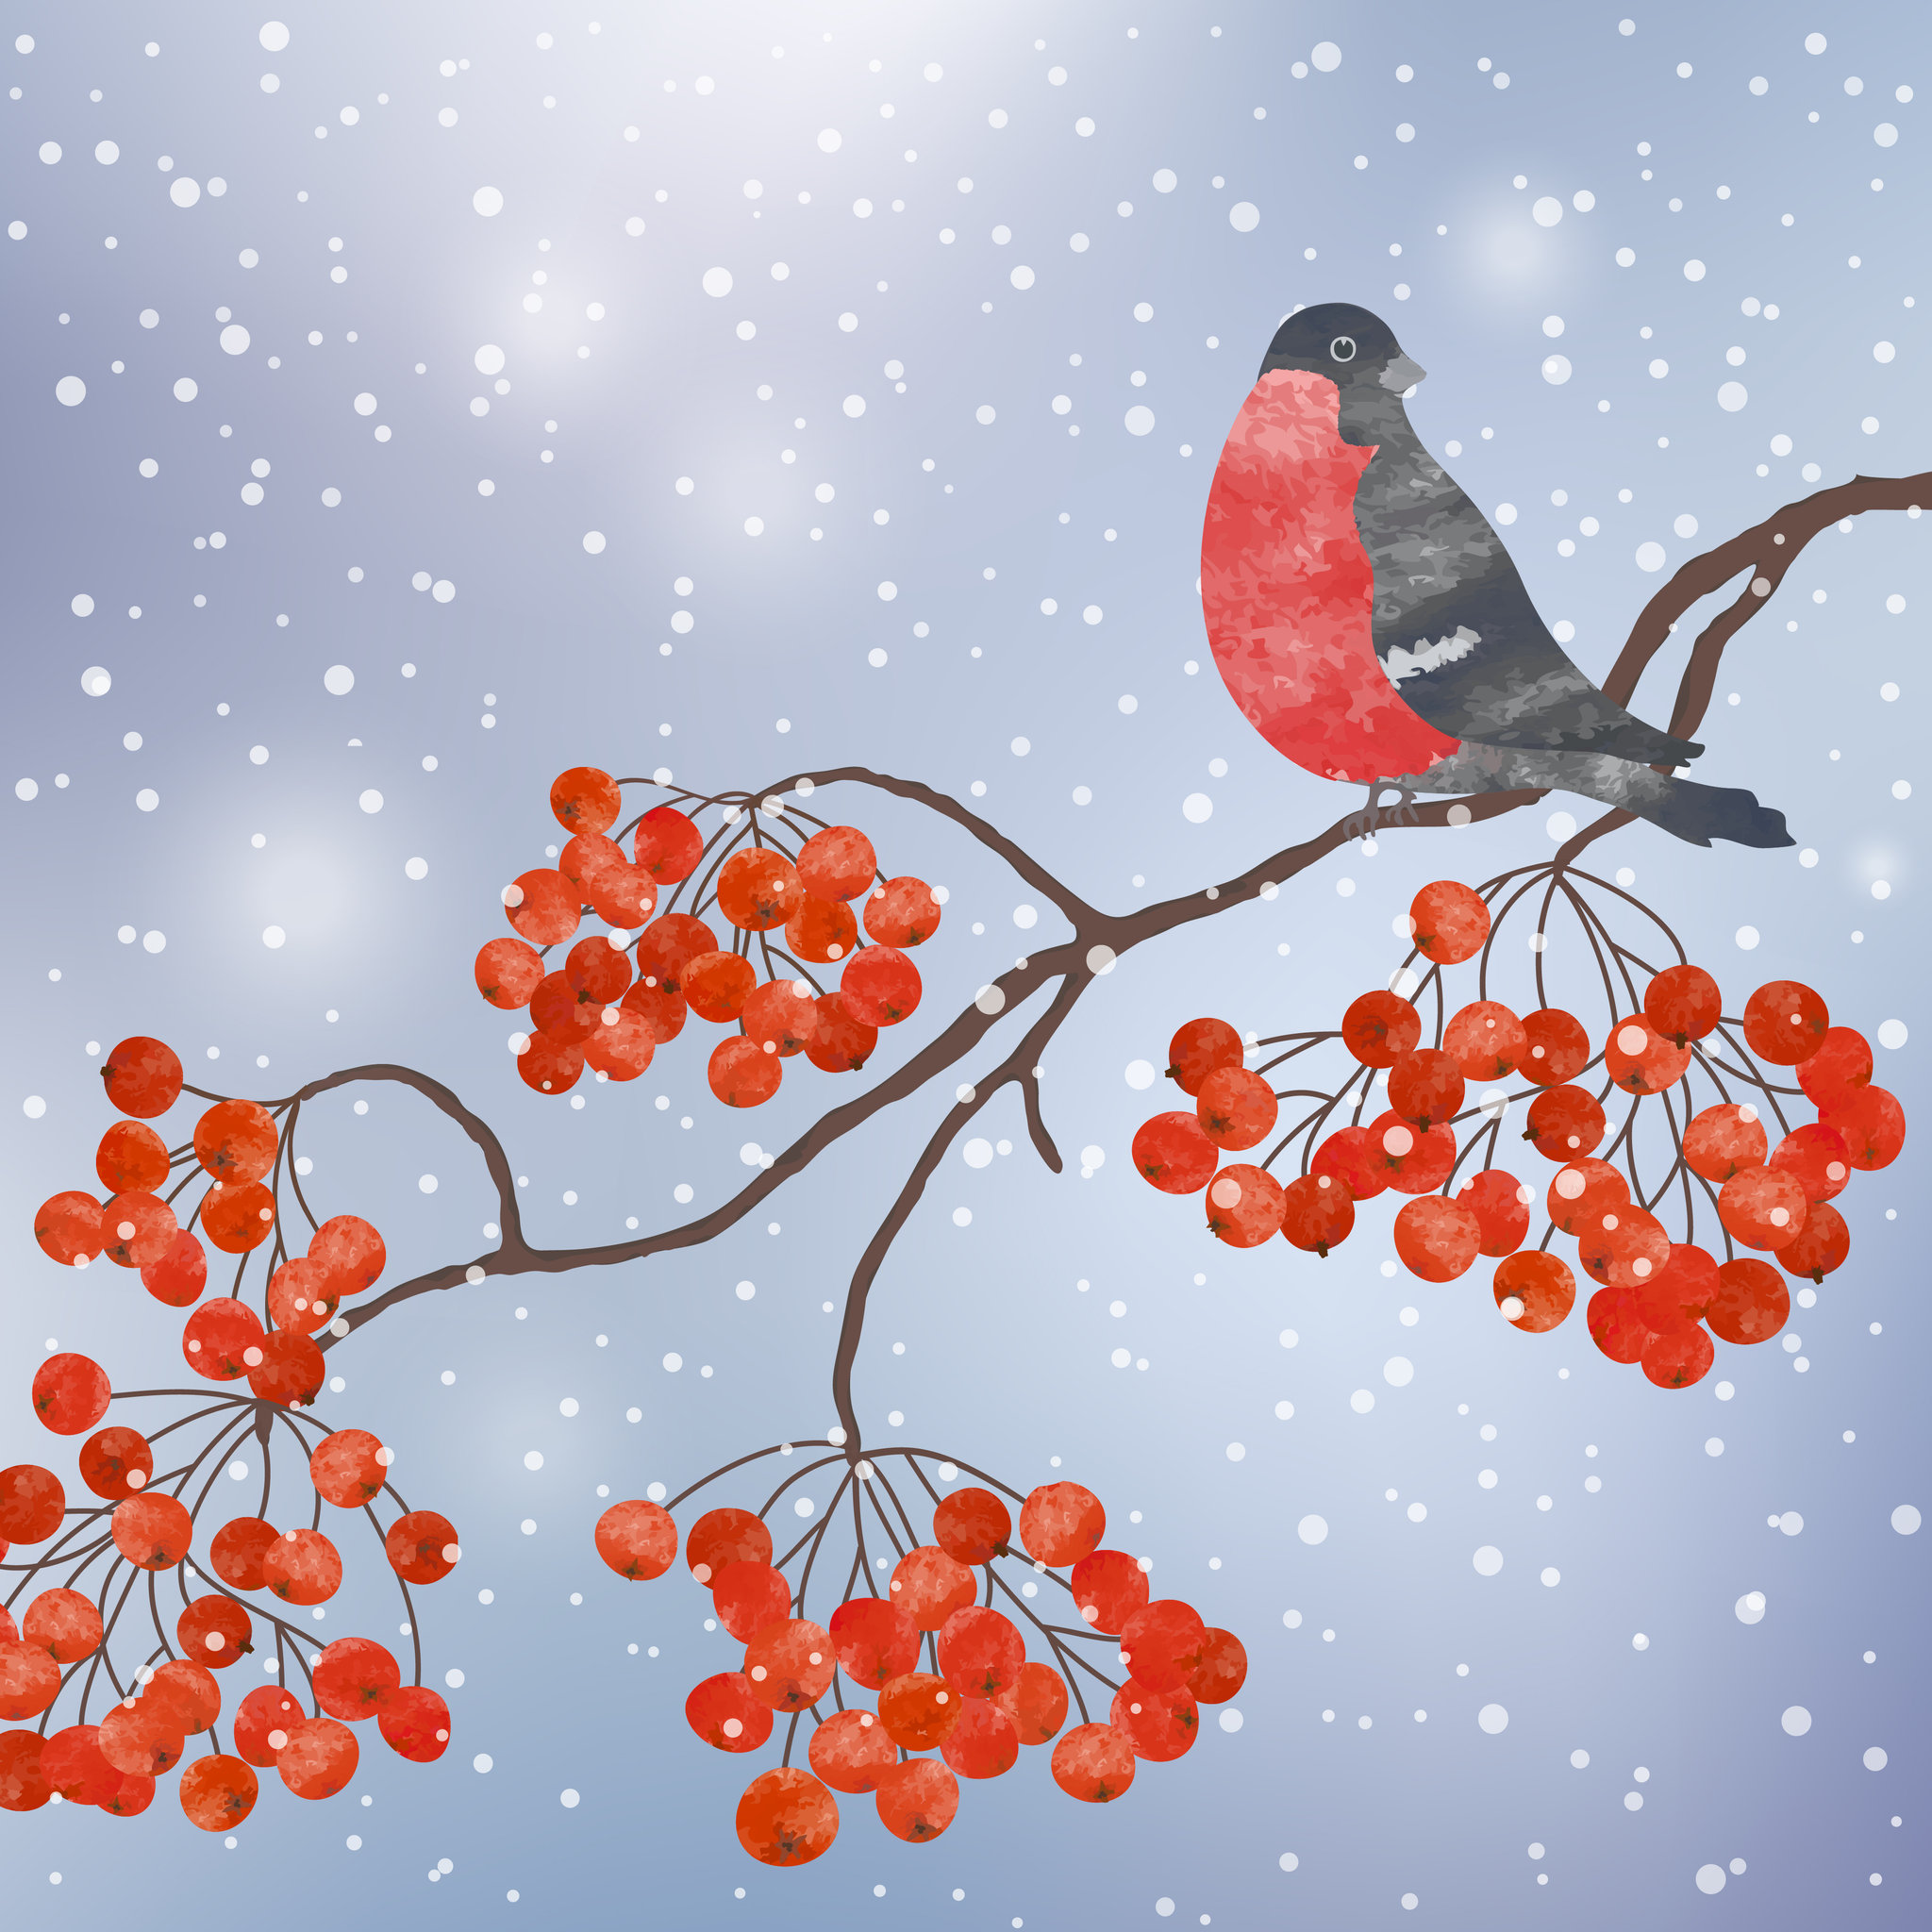 Snowy red berries with bird